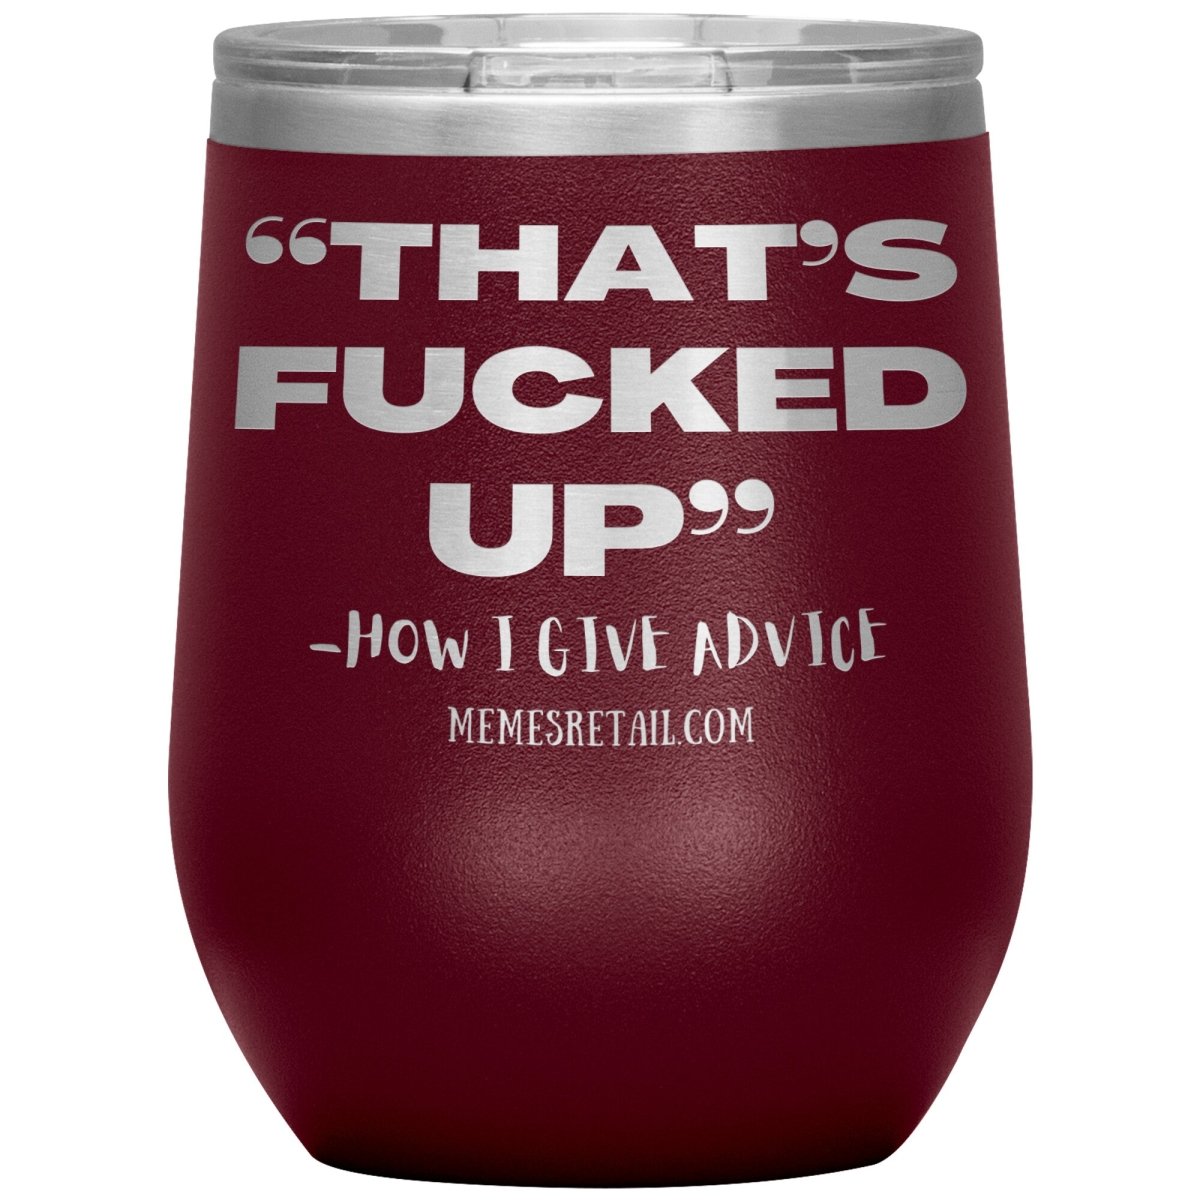 “That’s Fucked Up” -how I give advice Tumblers, 12oz Wine Insulated Tumbler / Maroon - MemesRetail.com